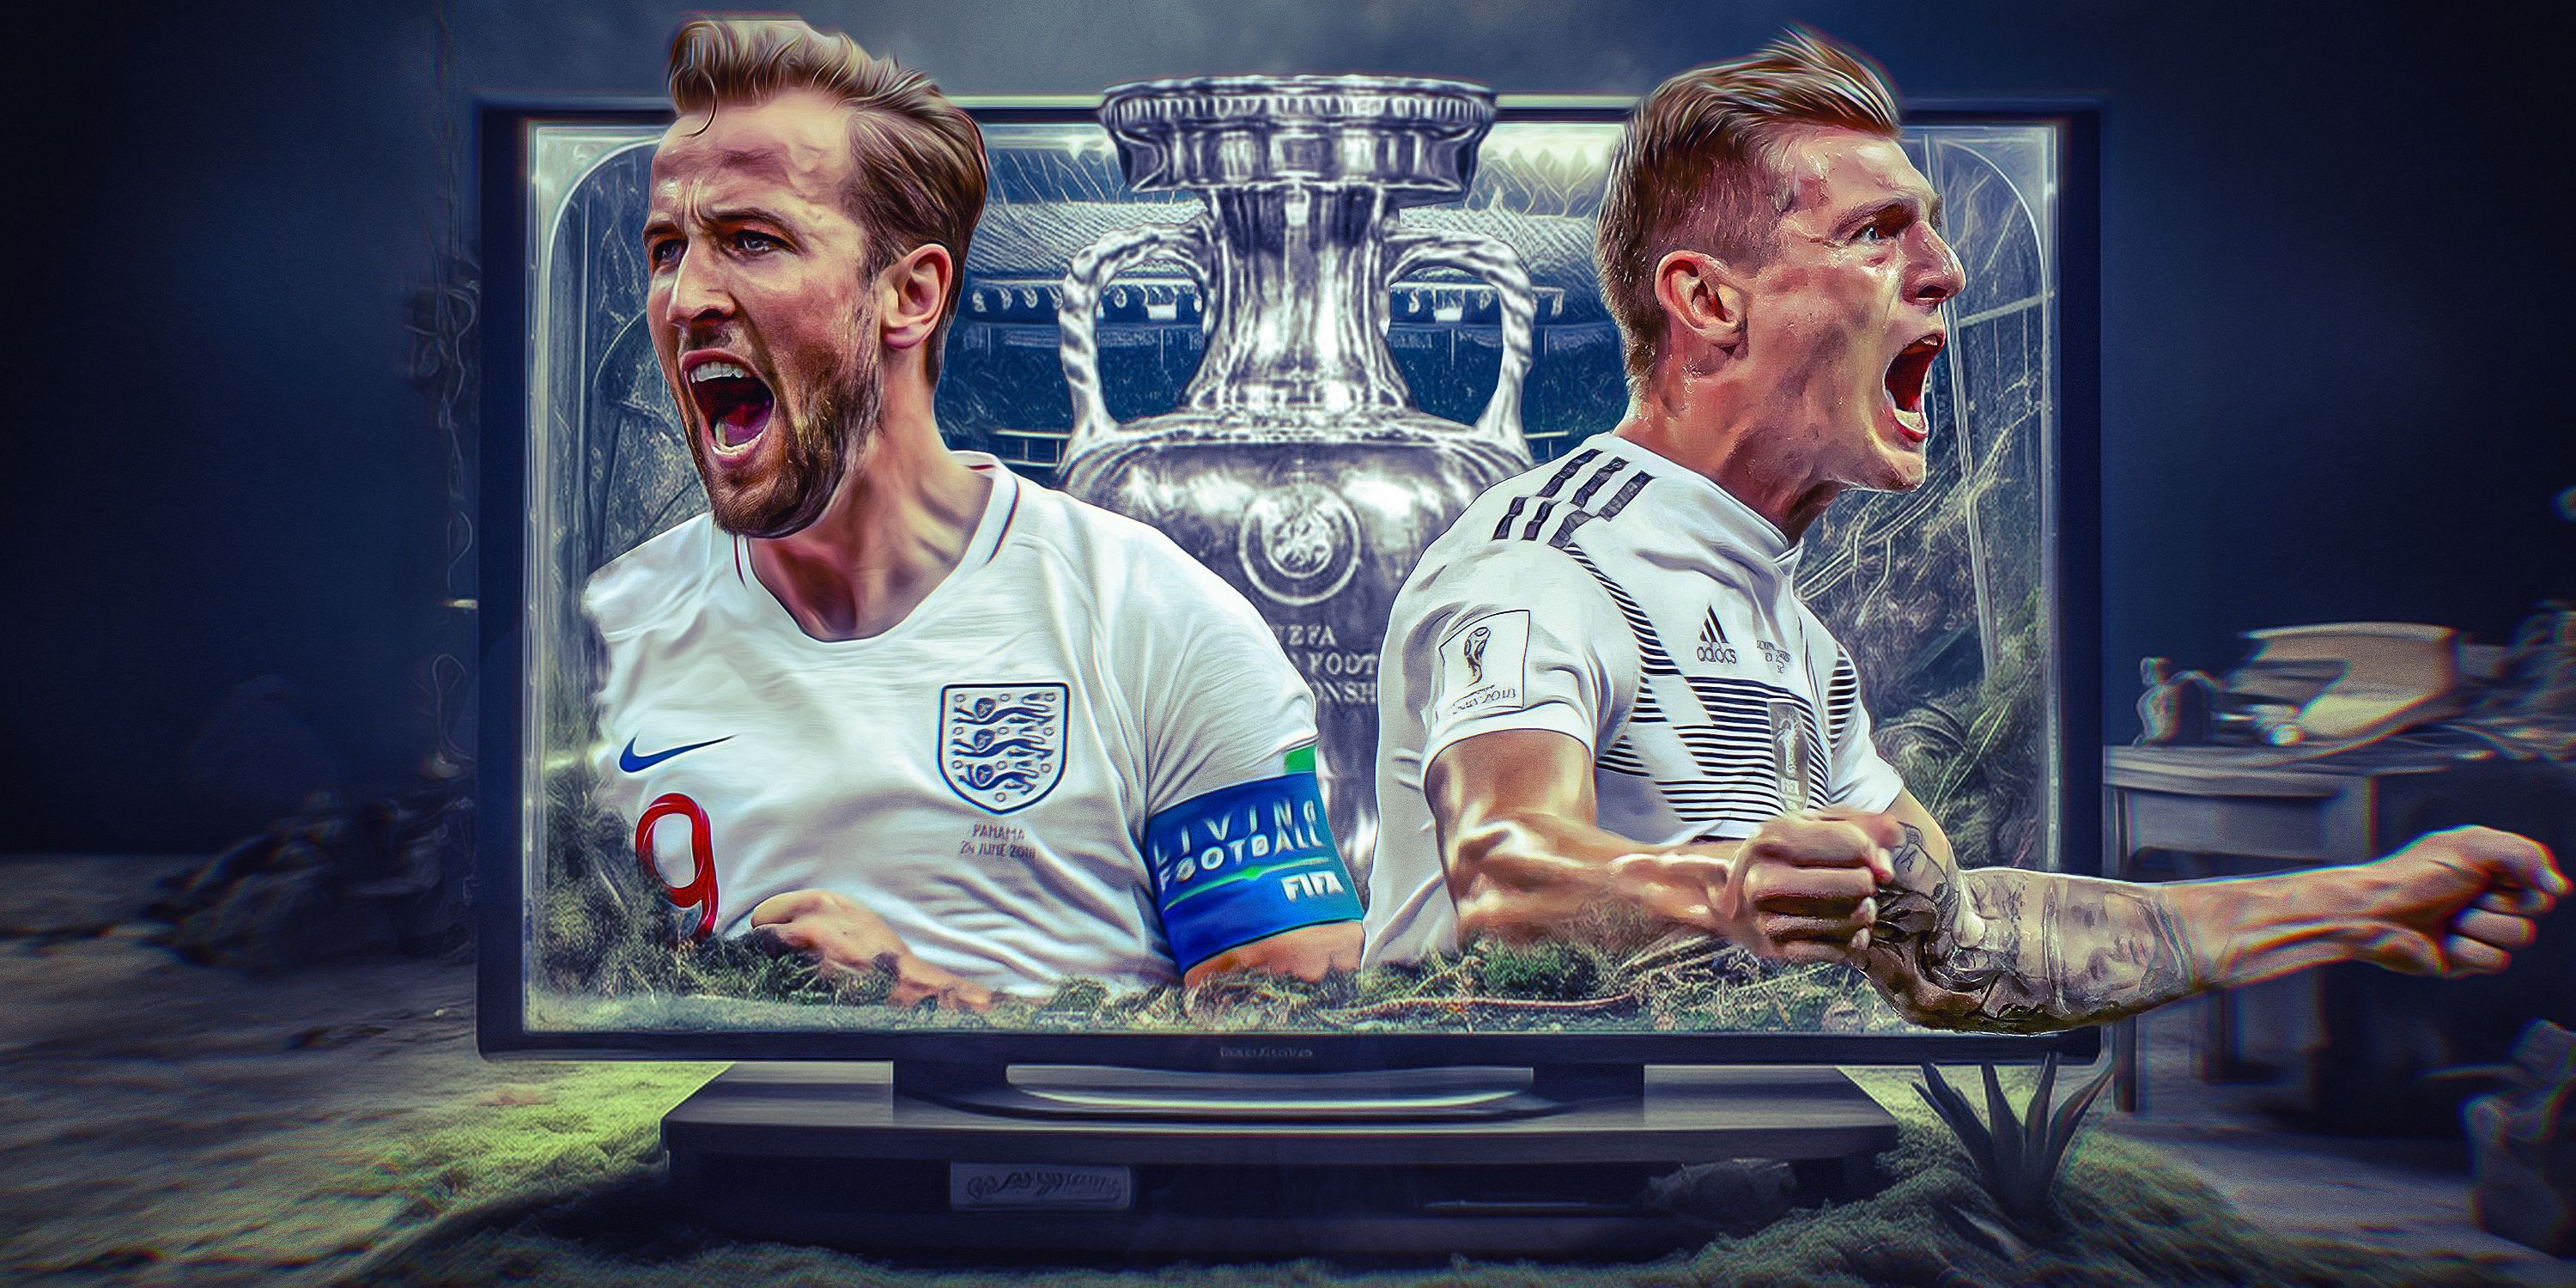 Collage featuring England's Harry Kane, the Euro trophy and Germany's Toni Kroos coming out of a TV.